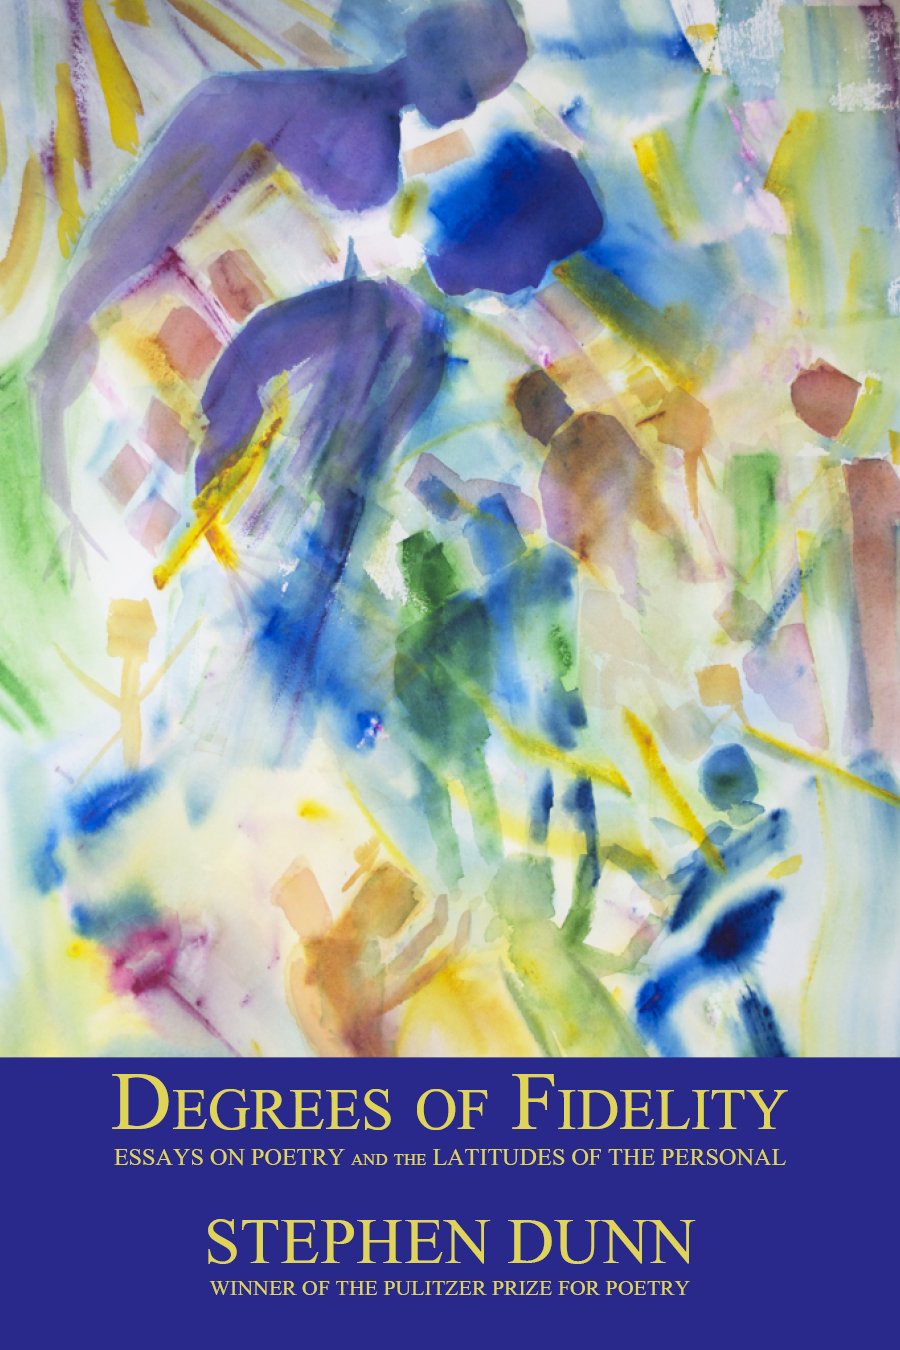 Degrees of Fidelity: Essays on Poetry and the Latitudes of the Personal